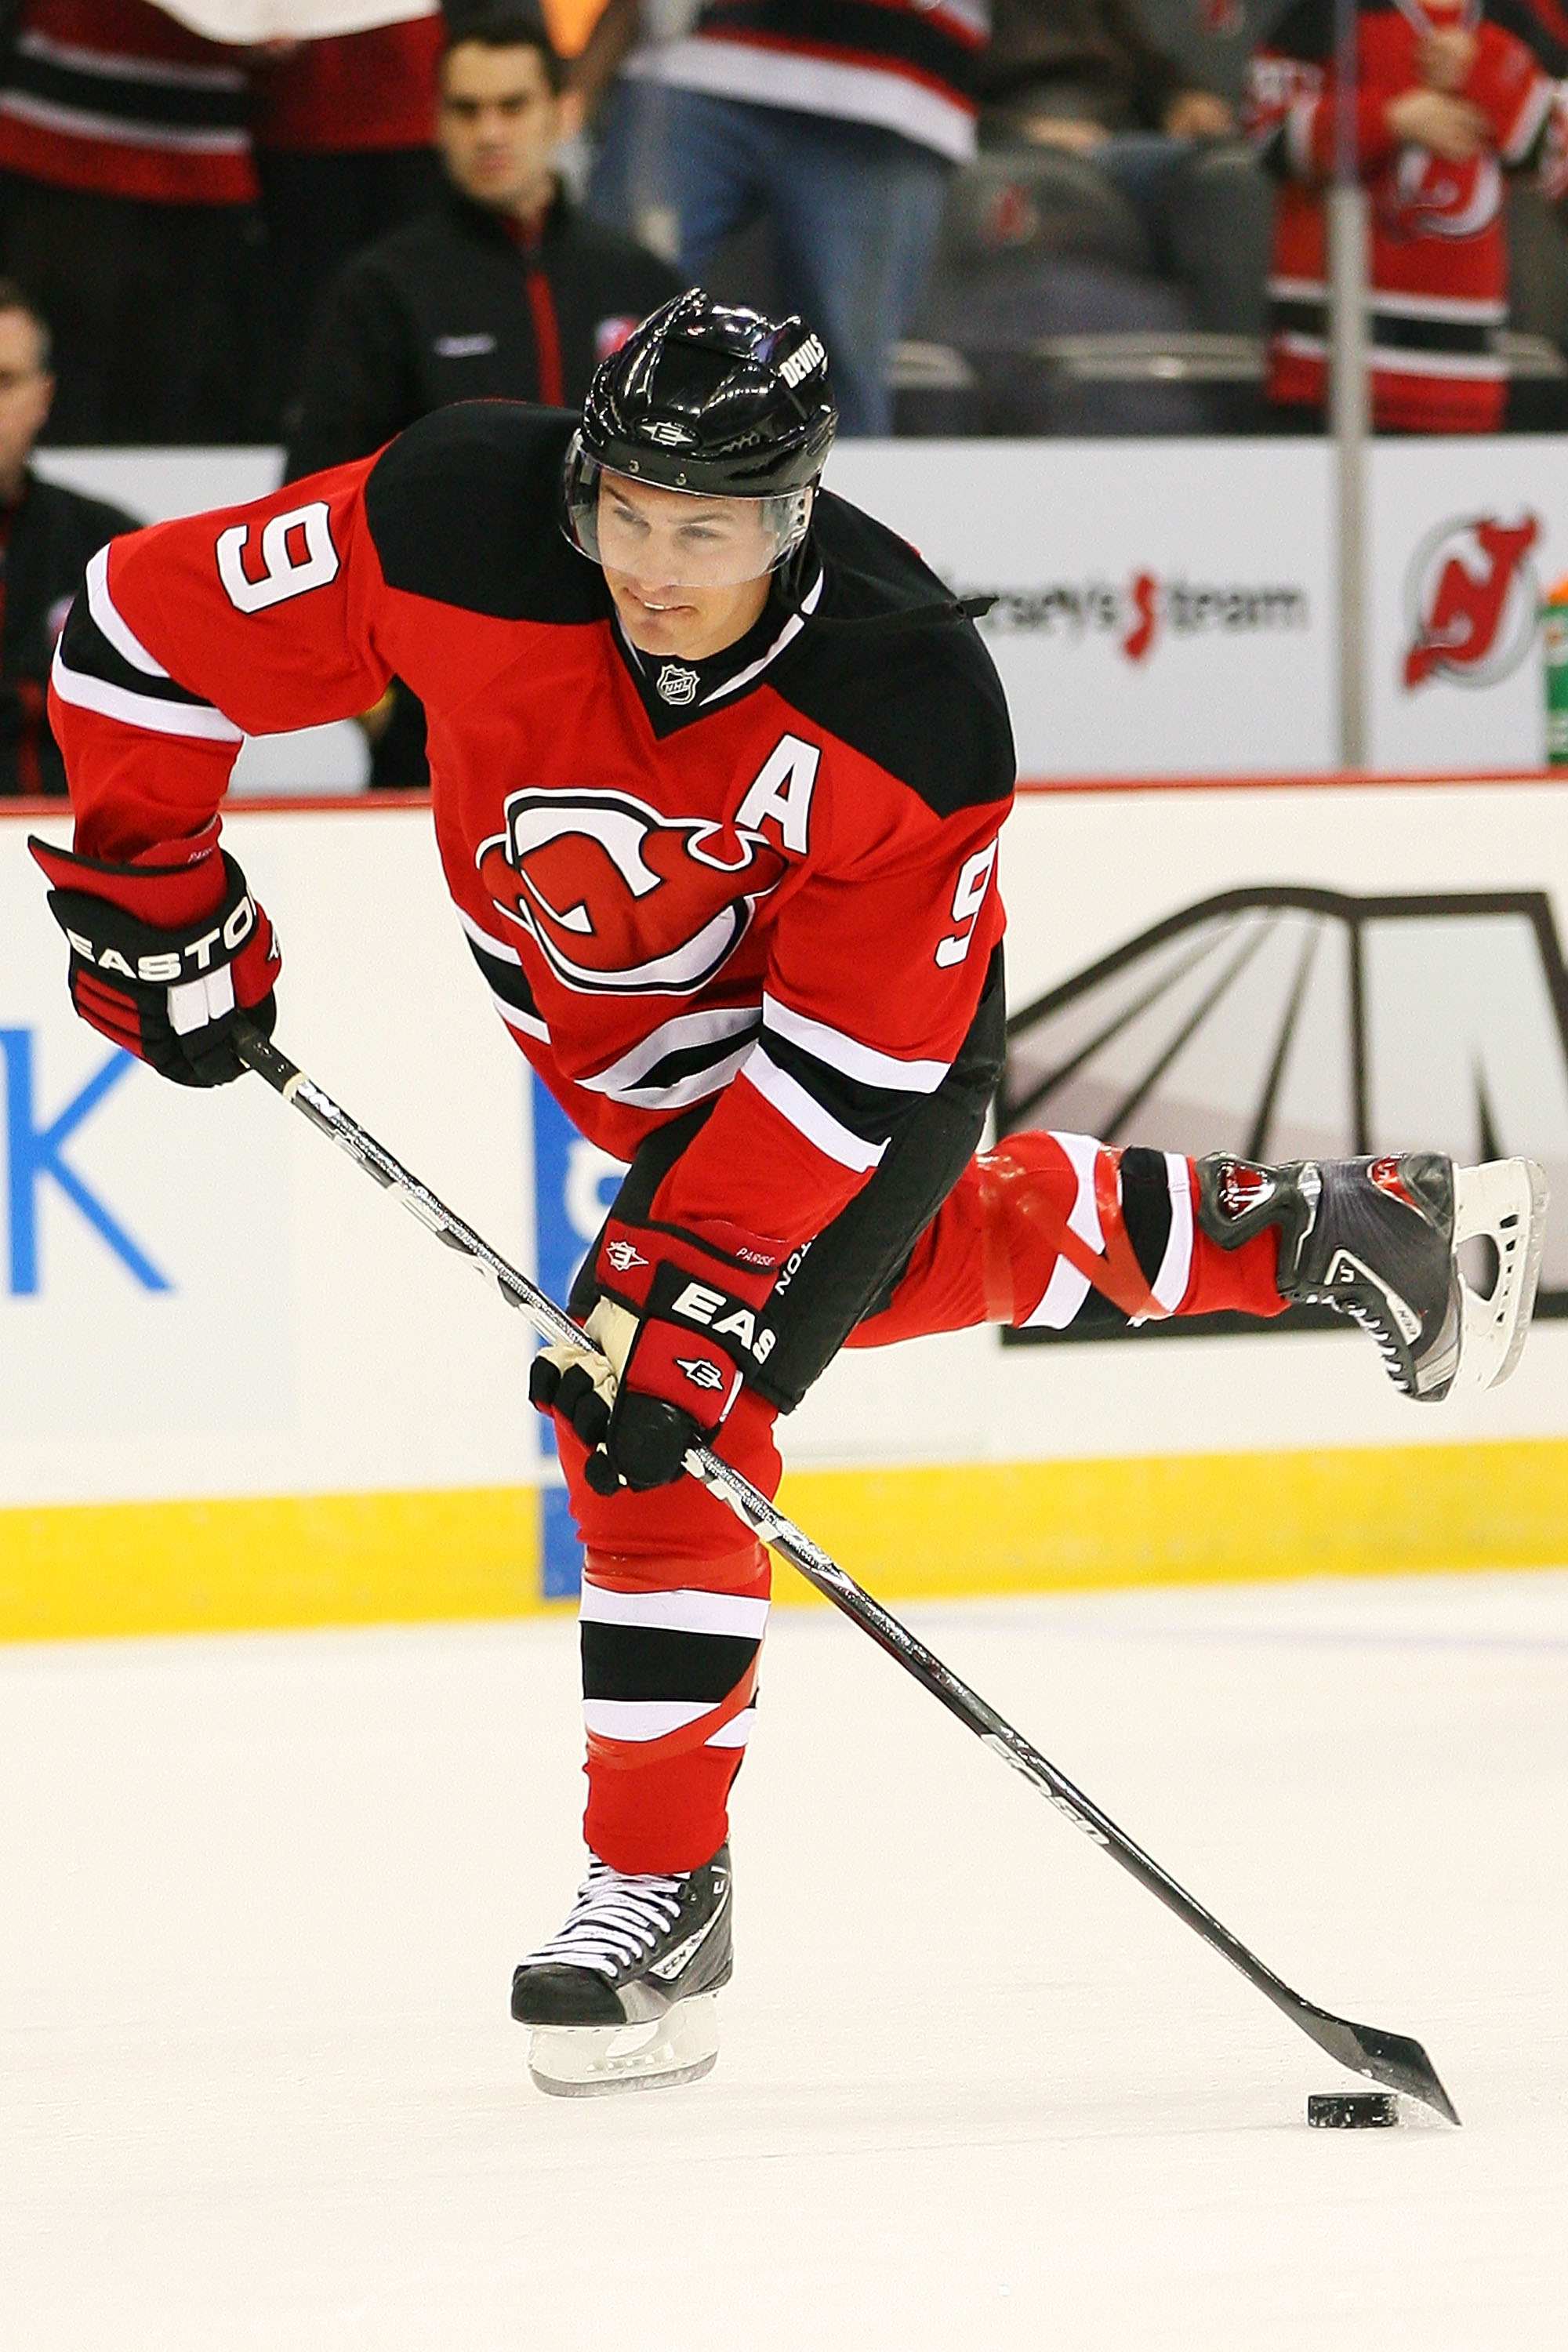 NEWARK, NJ - OCTOBER 23:  Zach Parise #9 of the New Jersey Devils warms up before a game against the Buffalo Sabres on October 23, 2010 at the Prudential Center in Newark, New Jersey. The Sabres defeated the Devils 6 - 1.  (Photo by Andrew Burton/Getty Im